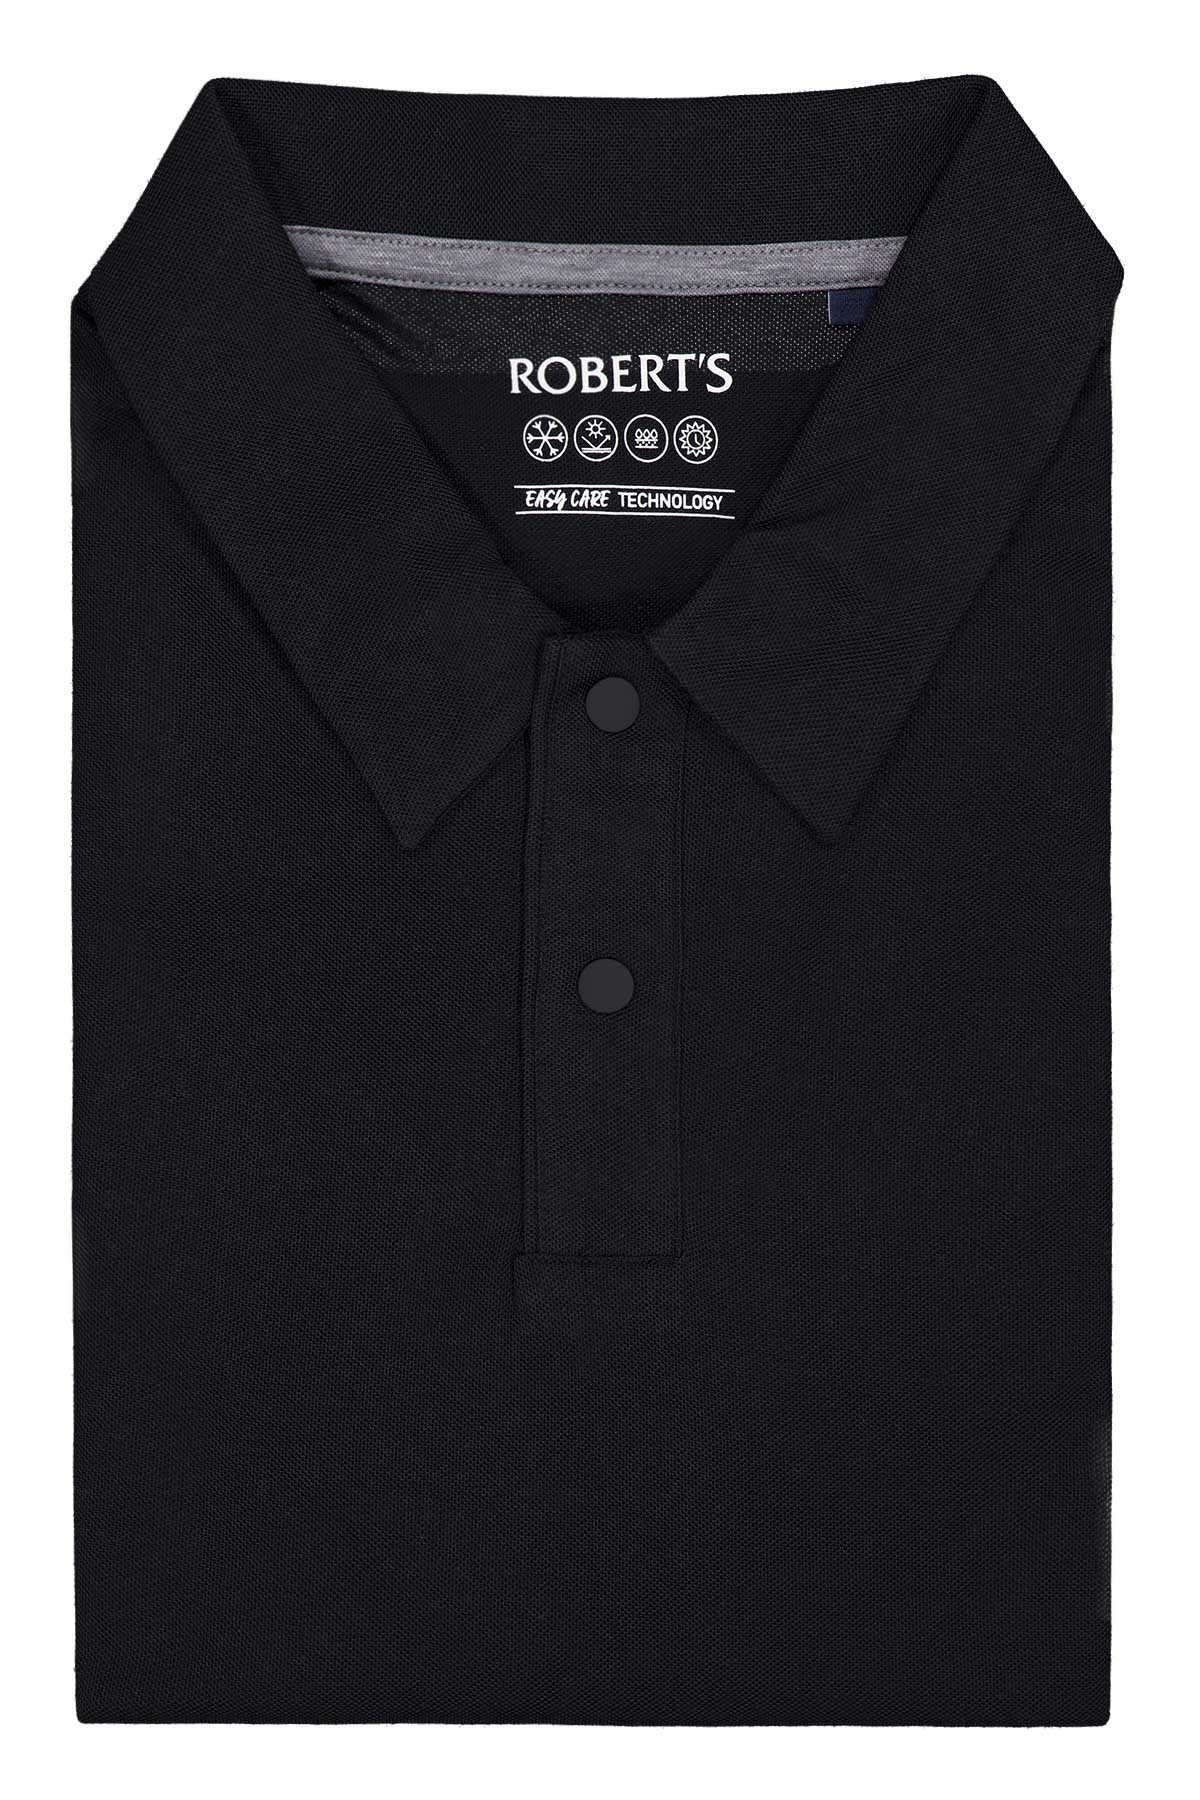 Polo EASY CARE TECHNOLOGY Roberts Color Negro Contemporary Fit